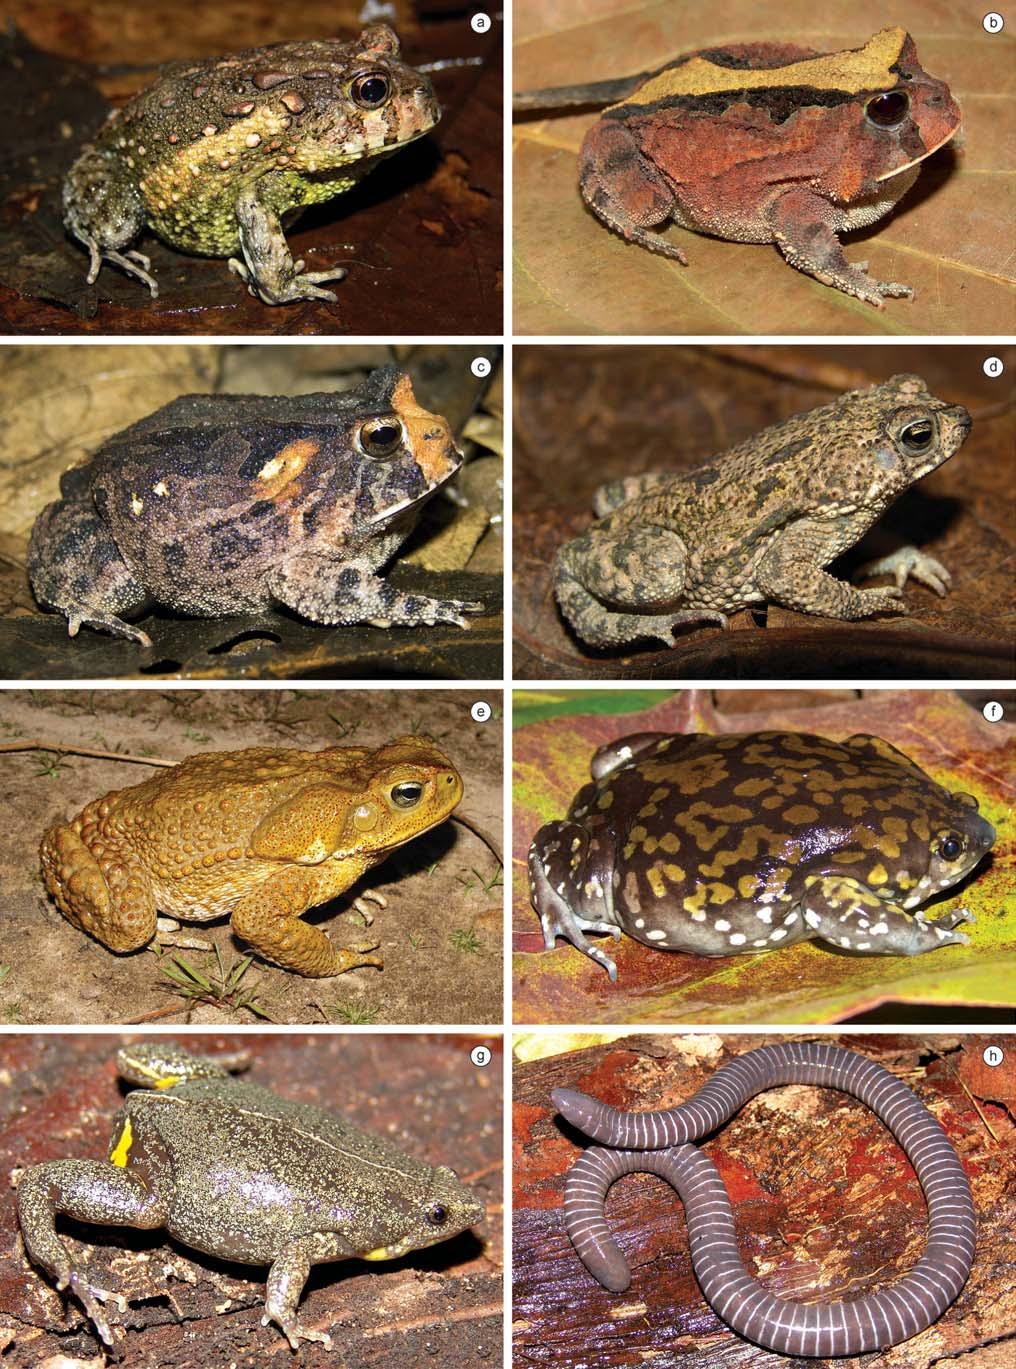 Biota Neotrop., vol. 10, no. 3 237 Amphibians and reptiles from a highly diverse area of the Caatinga domain Figure 7. Amphibian species found in the region of CPI.